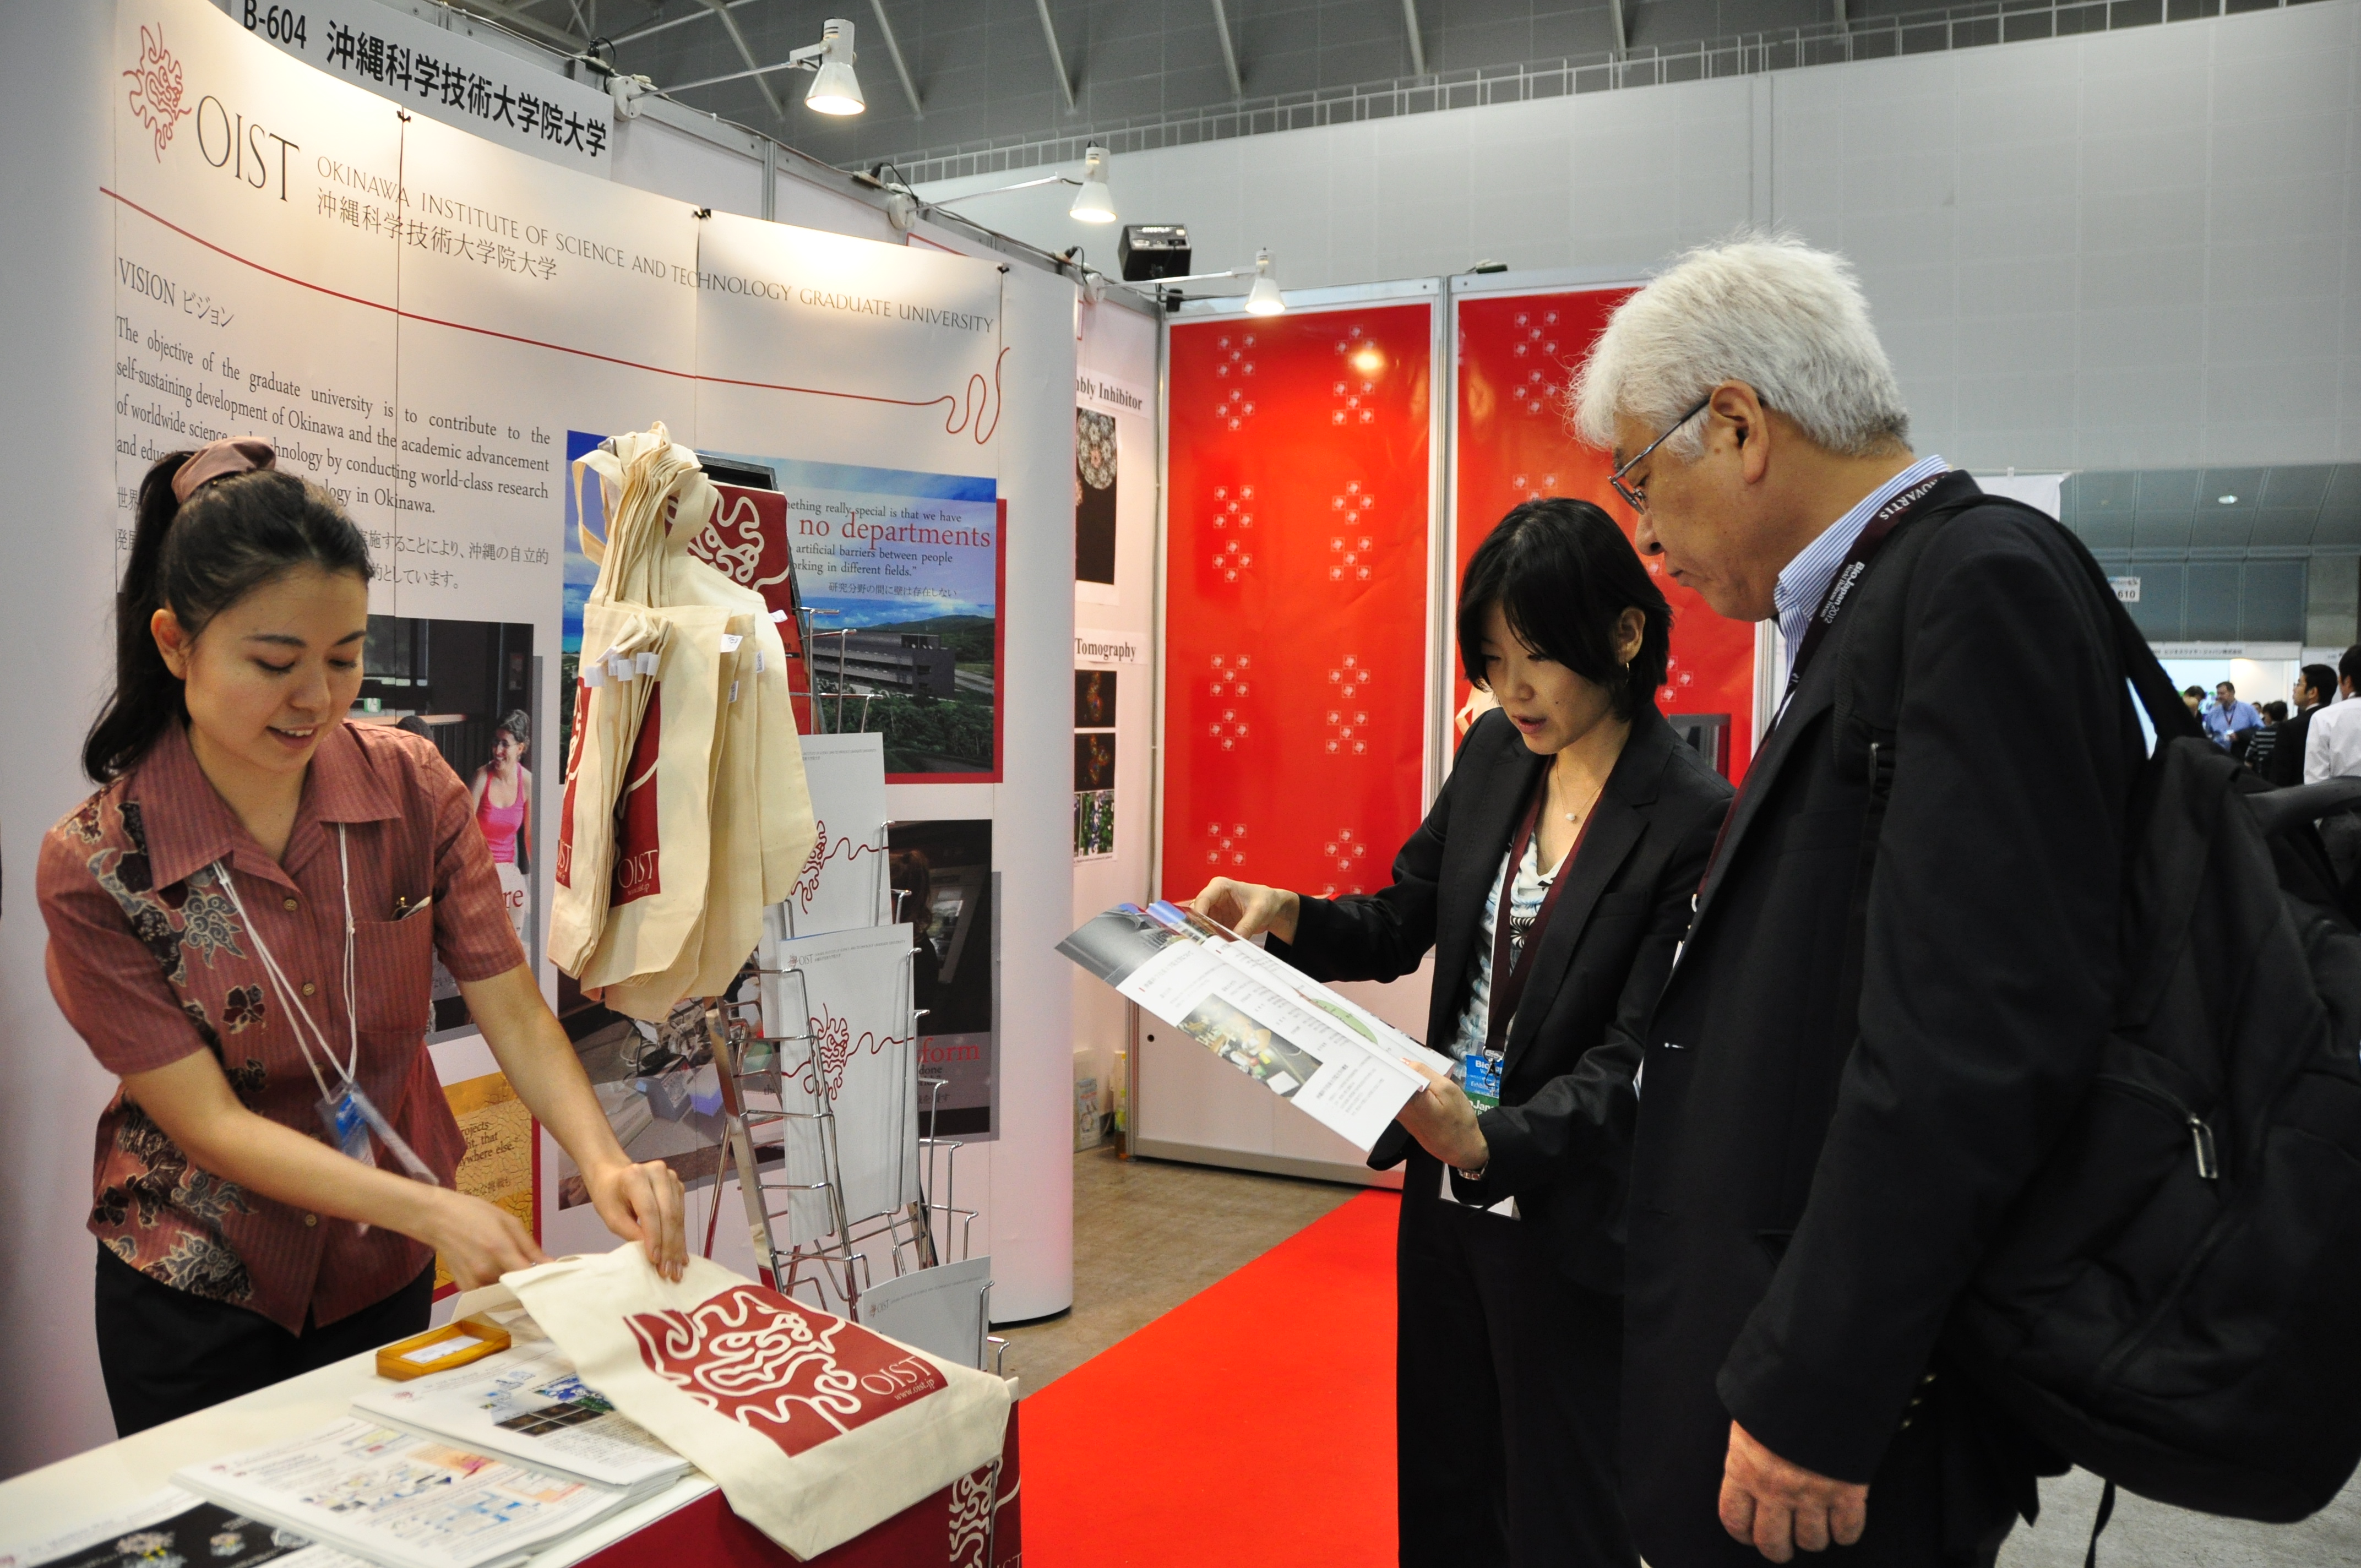 Ms. Nishimura (right) and Ms. Lee Nakasone attend a visitor to the OIST booth